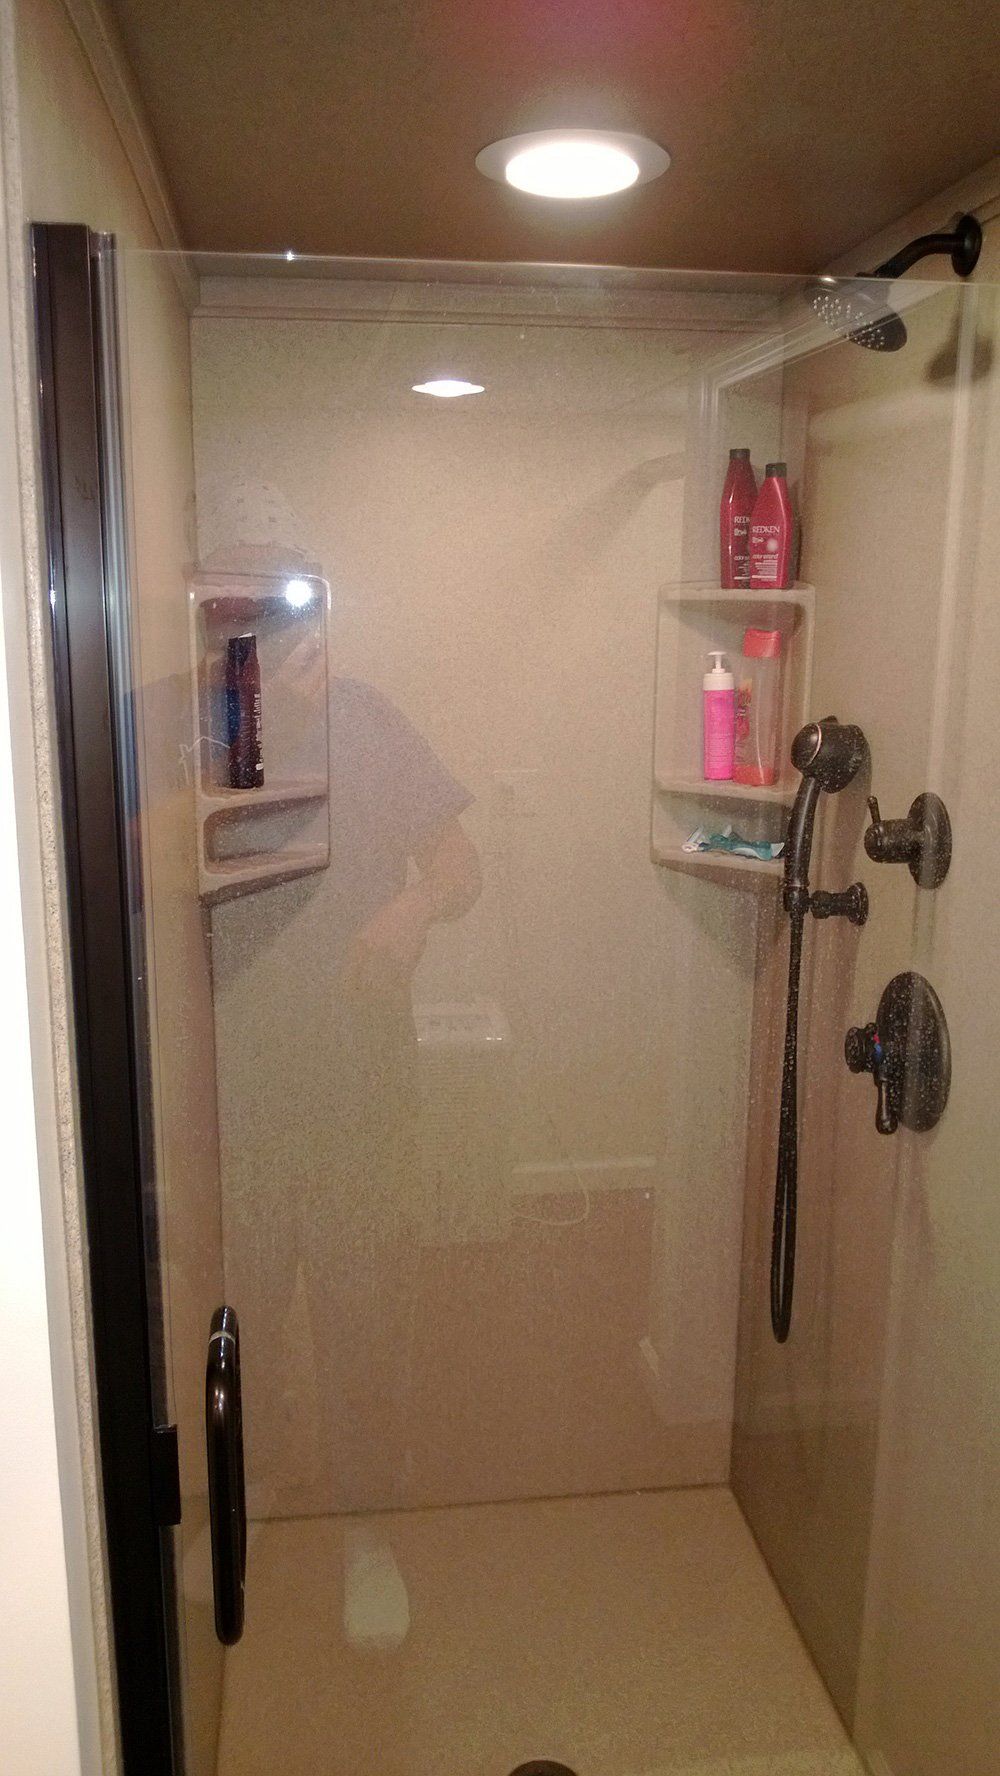 Shower -  Remodeling Services in Slippery Rock, PA